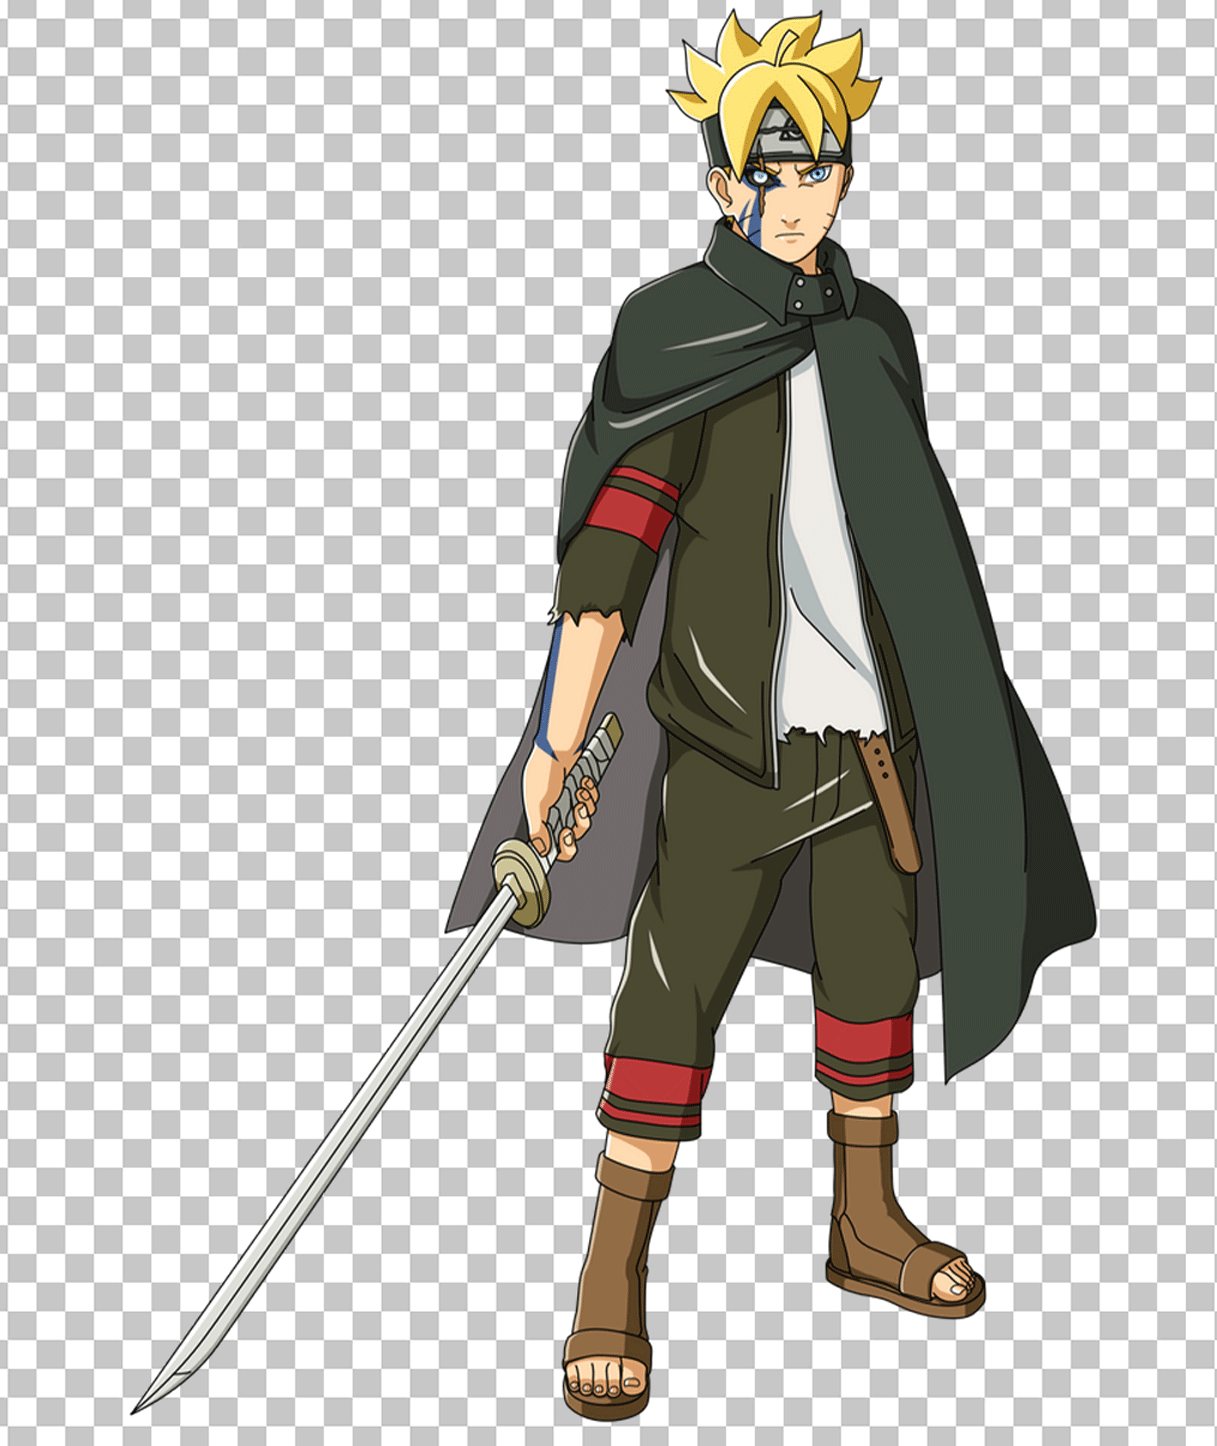 Boruto with spiky blond hair holding a sword in his right hand PNG Image.